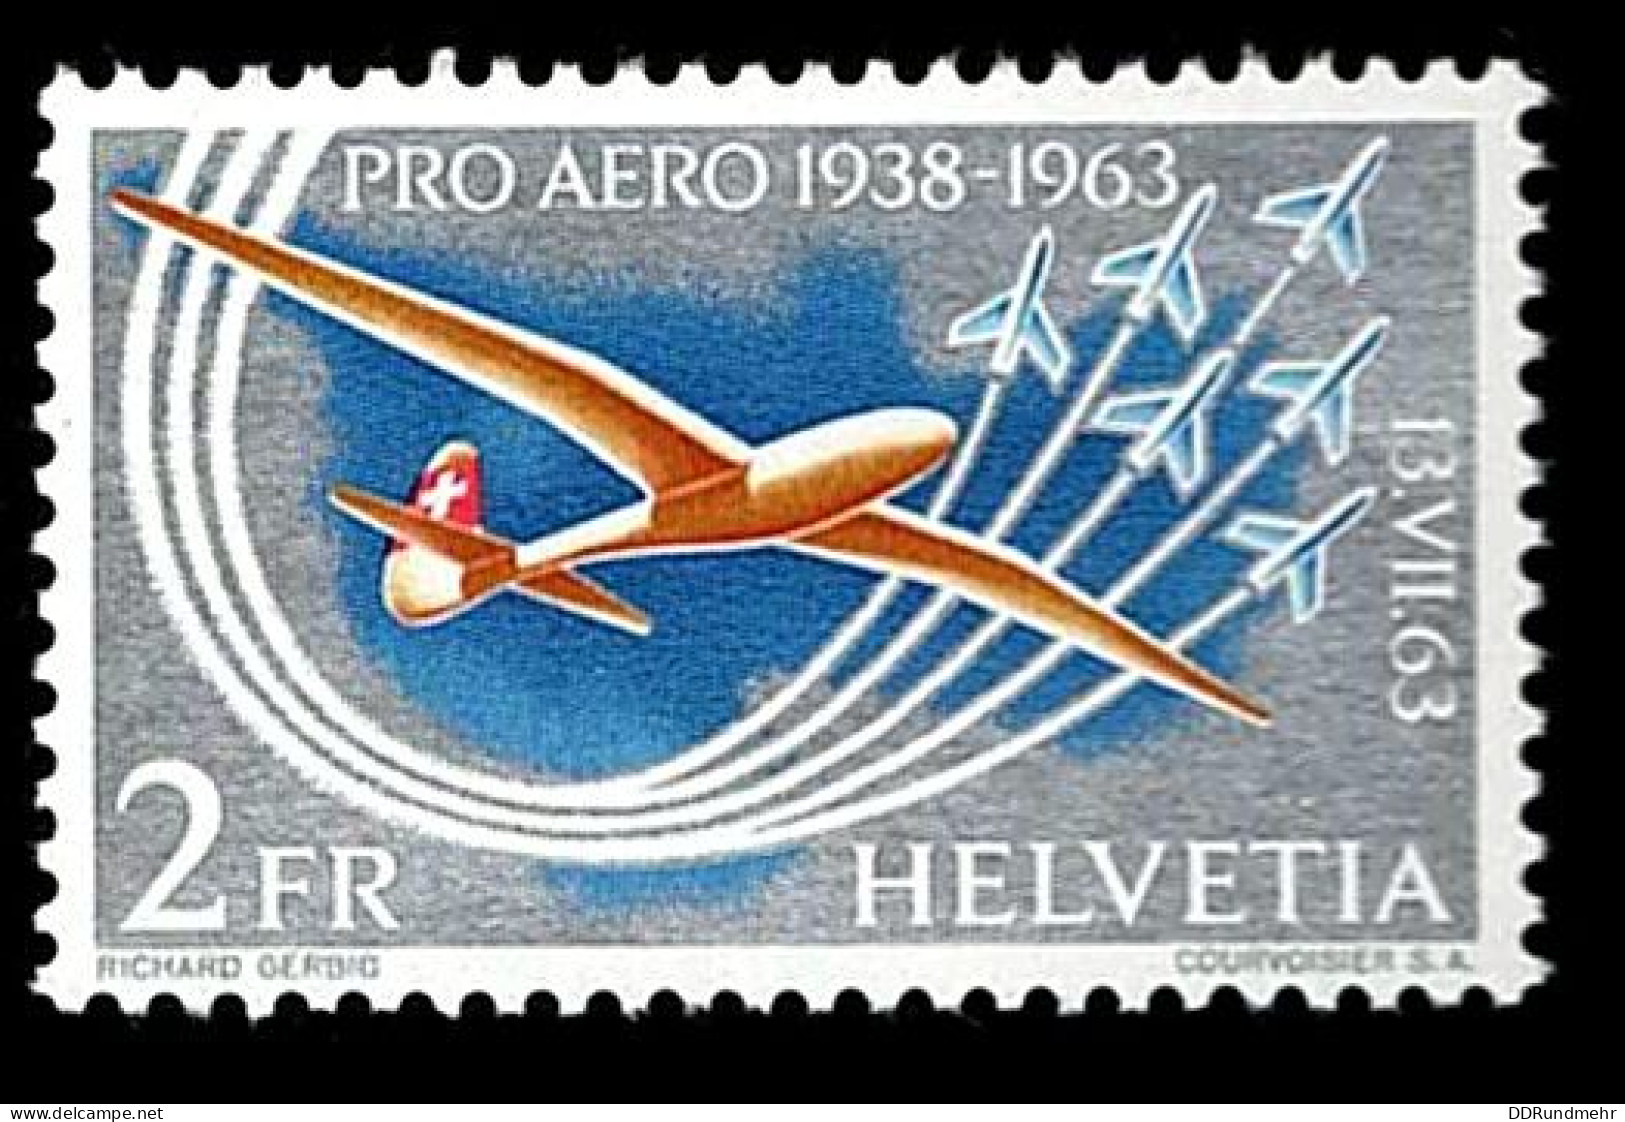 1963 Pro Aero  Michel CH 780 Stamp Number CH C46 Yvert Et Tellier CH PA45 Stanley Gibbons CH 681 Unificato CH A45 Xx MNH - Neufs